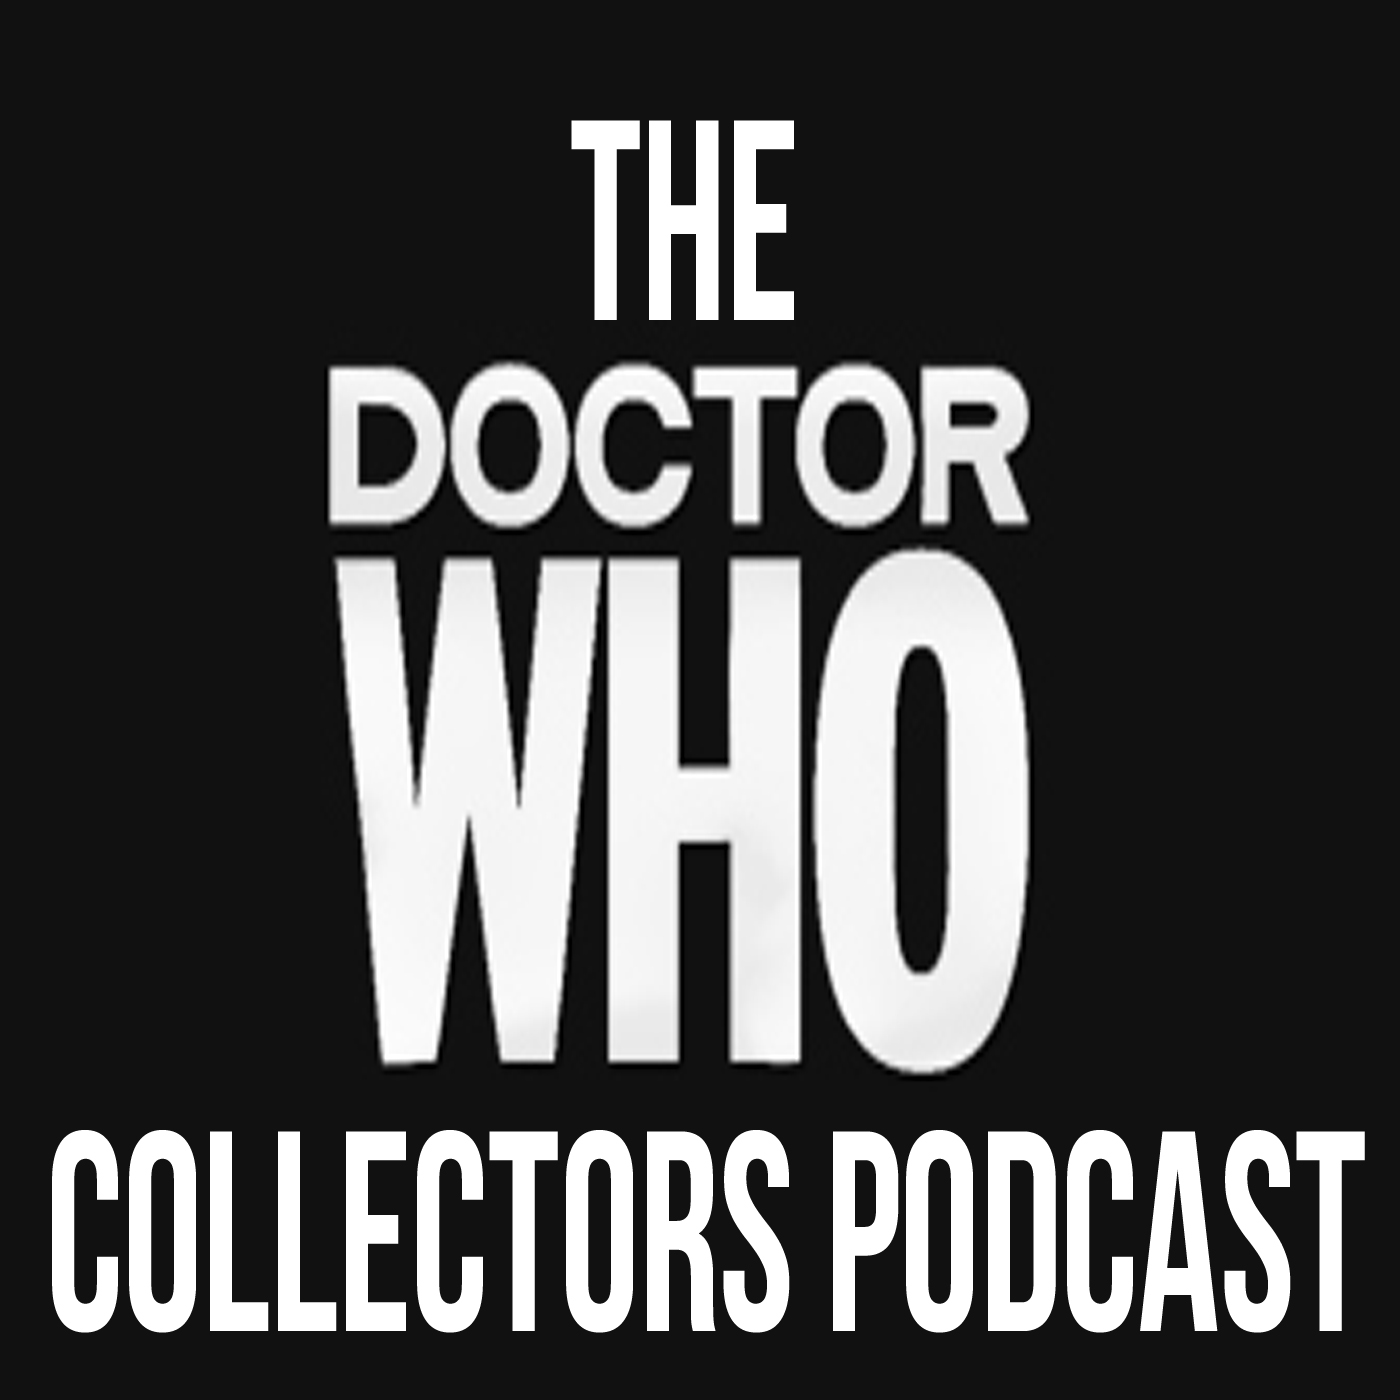 Thumbnail for Episode 54: Dr. Who Classic Hardcovers year 6 (1979) with Tony Whitt